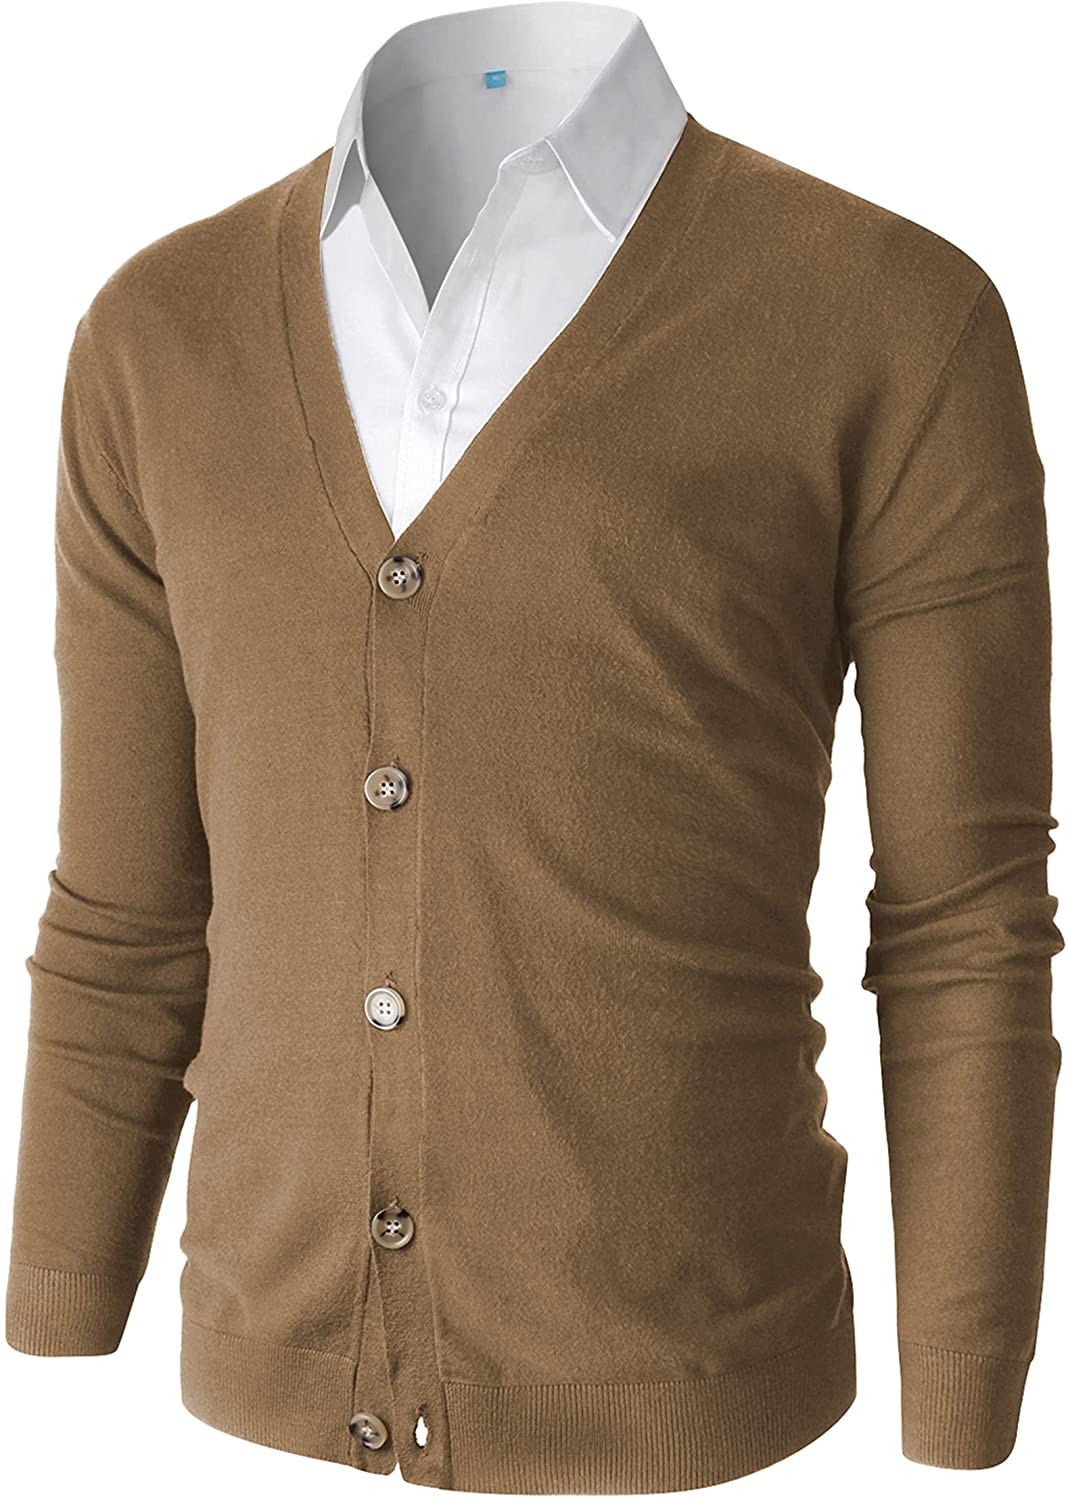 Aimeilgot Mens Fashion Casual Slim Fit Button Down Cable Knitted Stand Collar Cardigan Sweater 